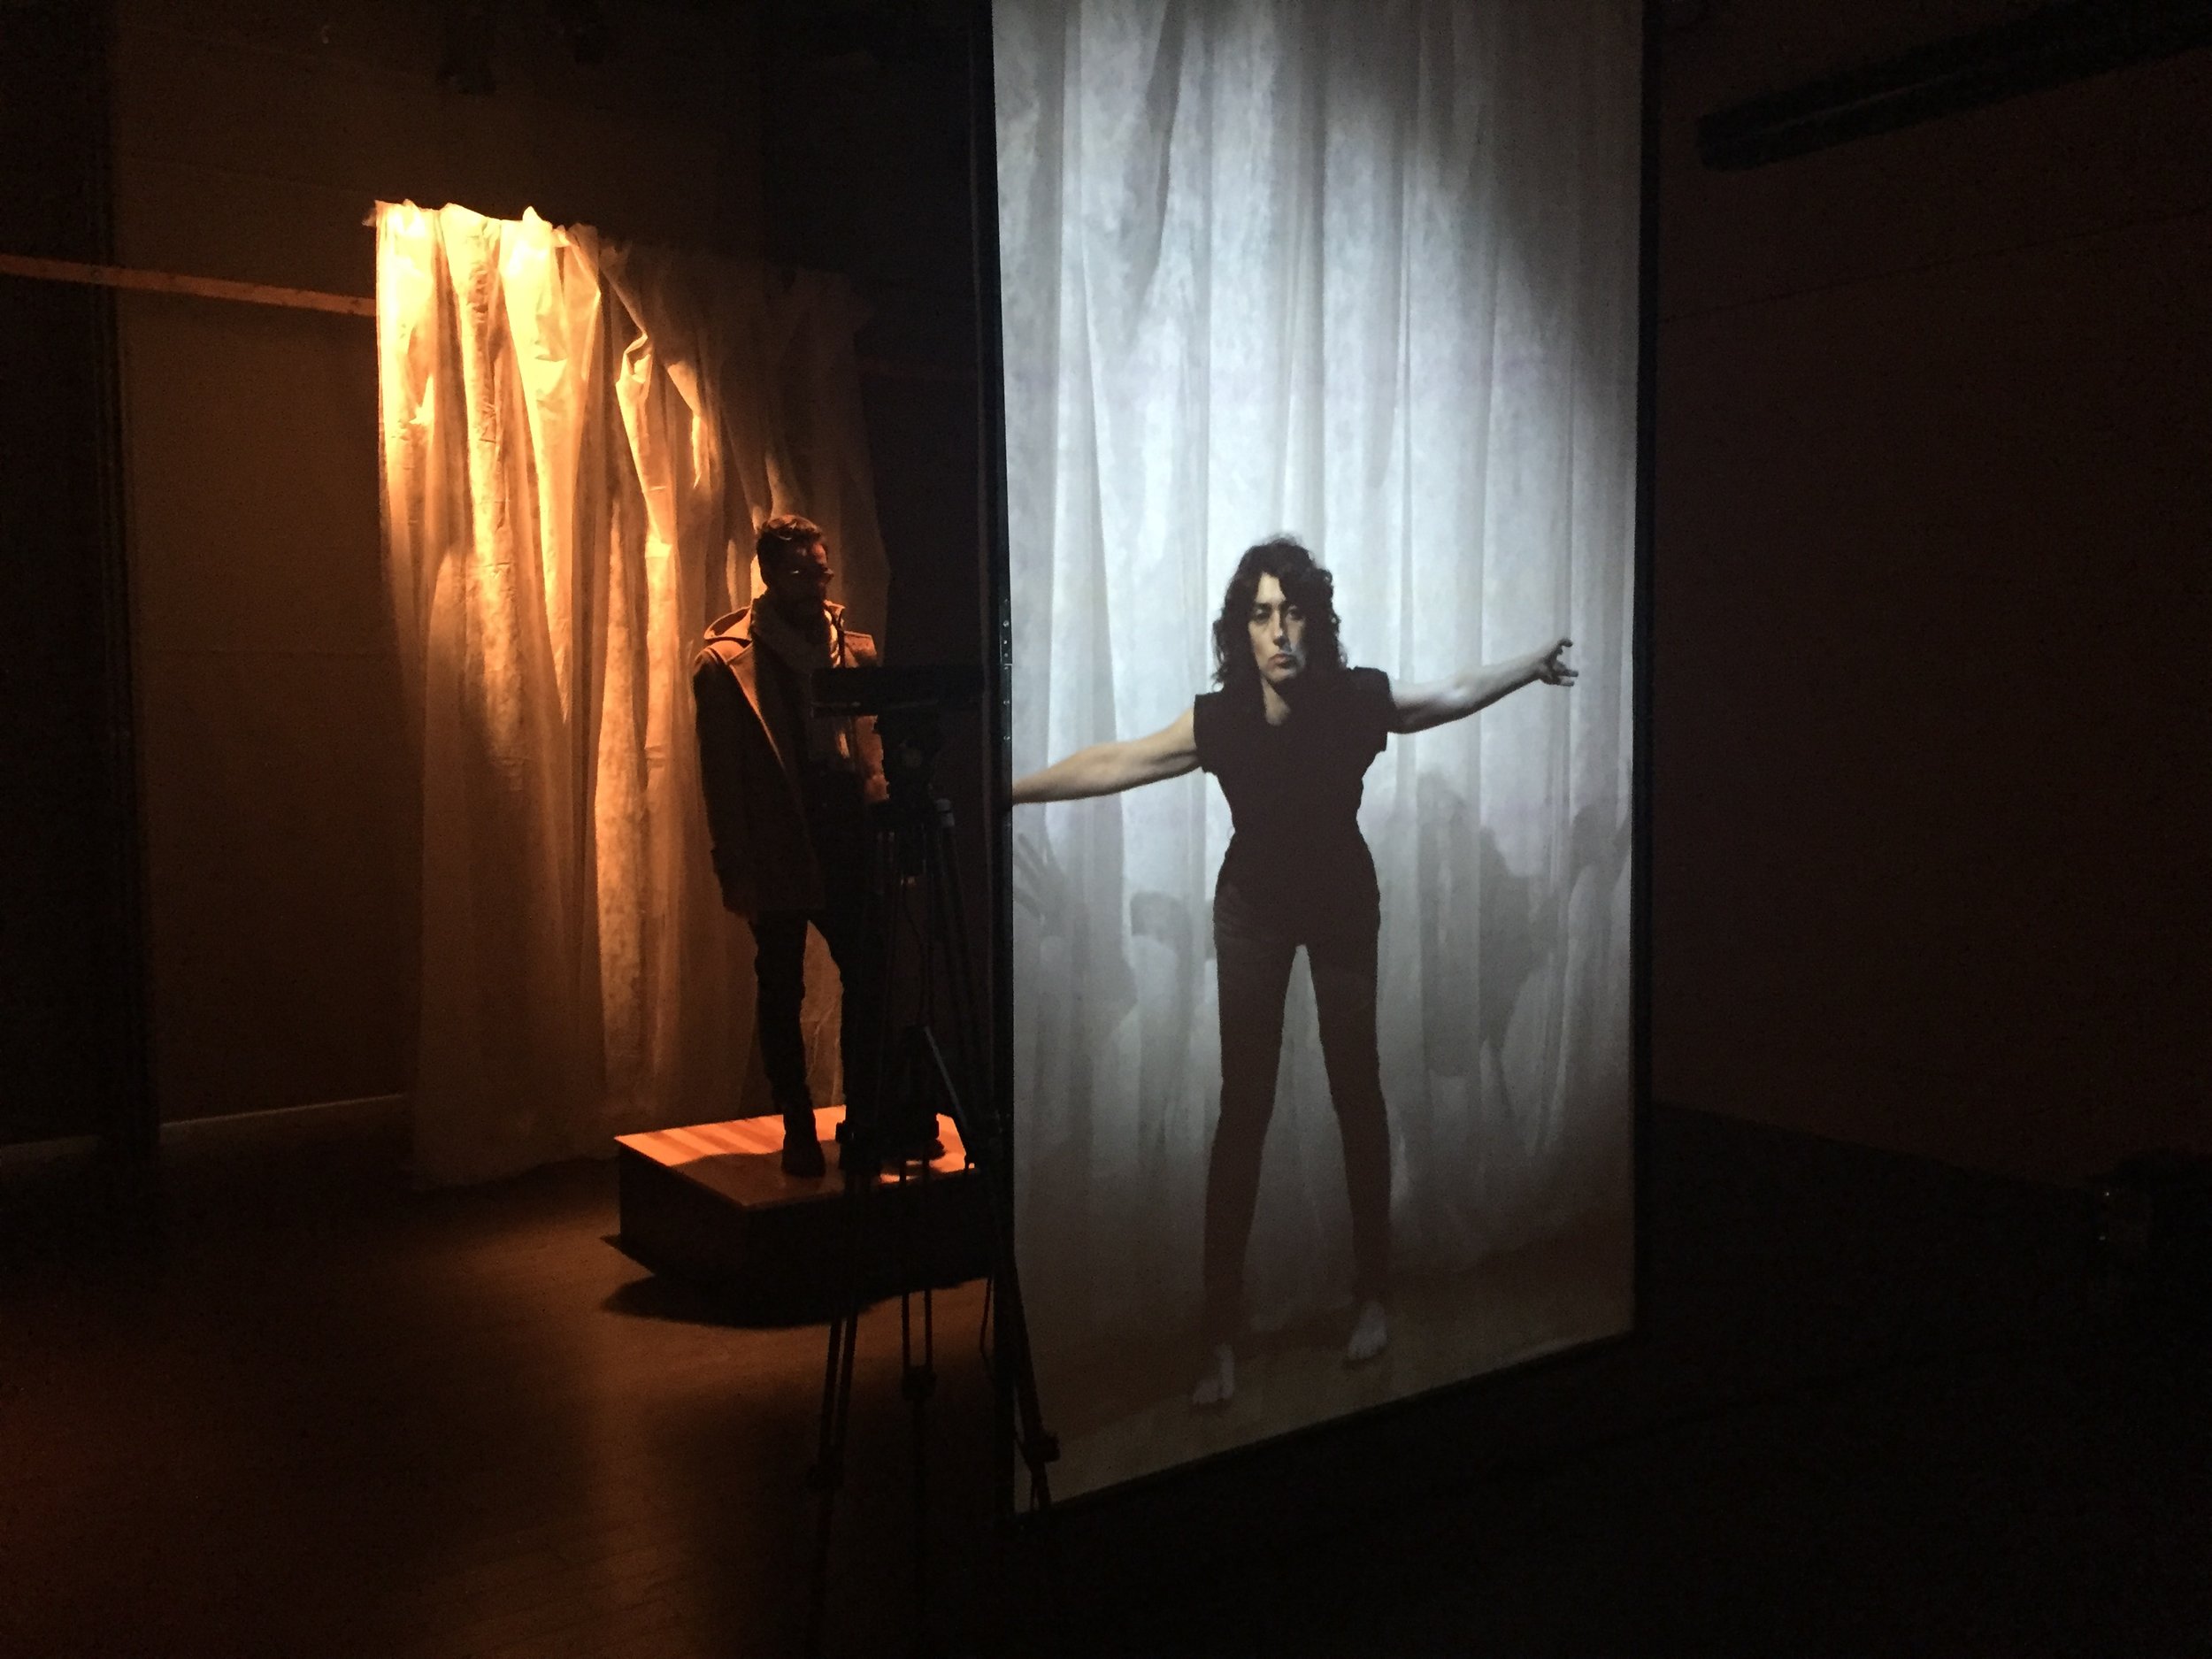 A person stands on a platform and interacts with a video (a performer gesturing in front of a white curtain.).